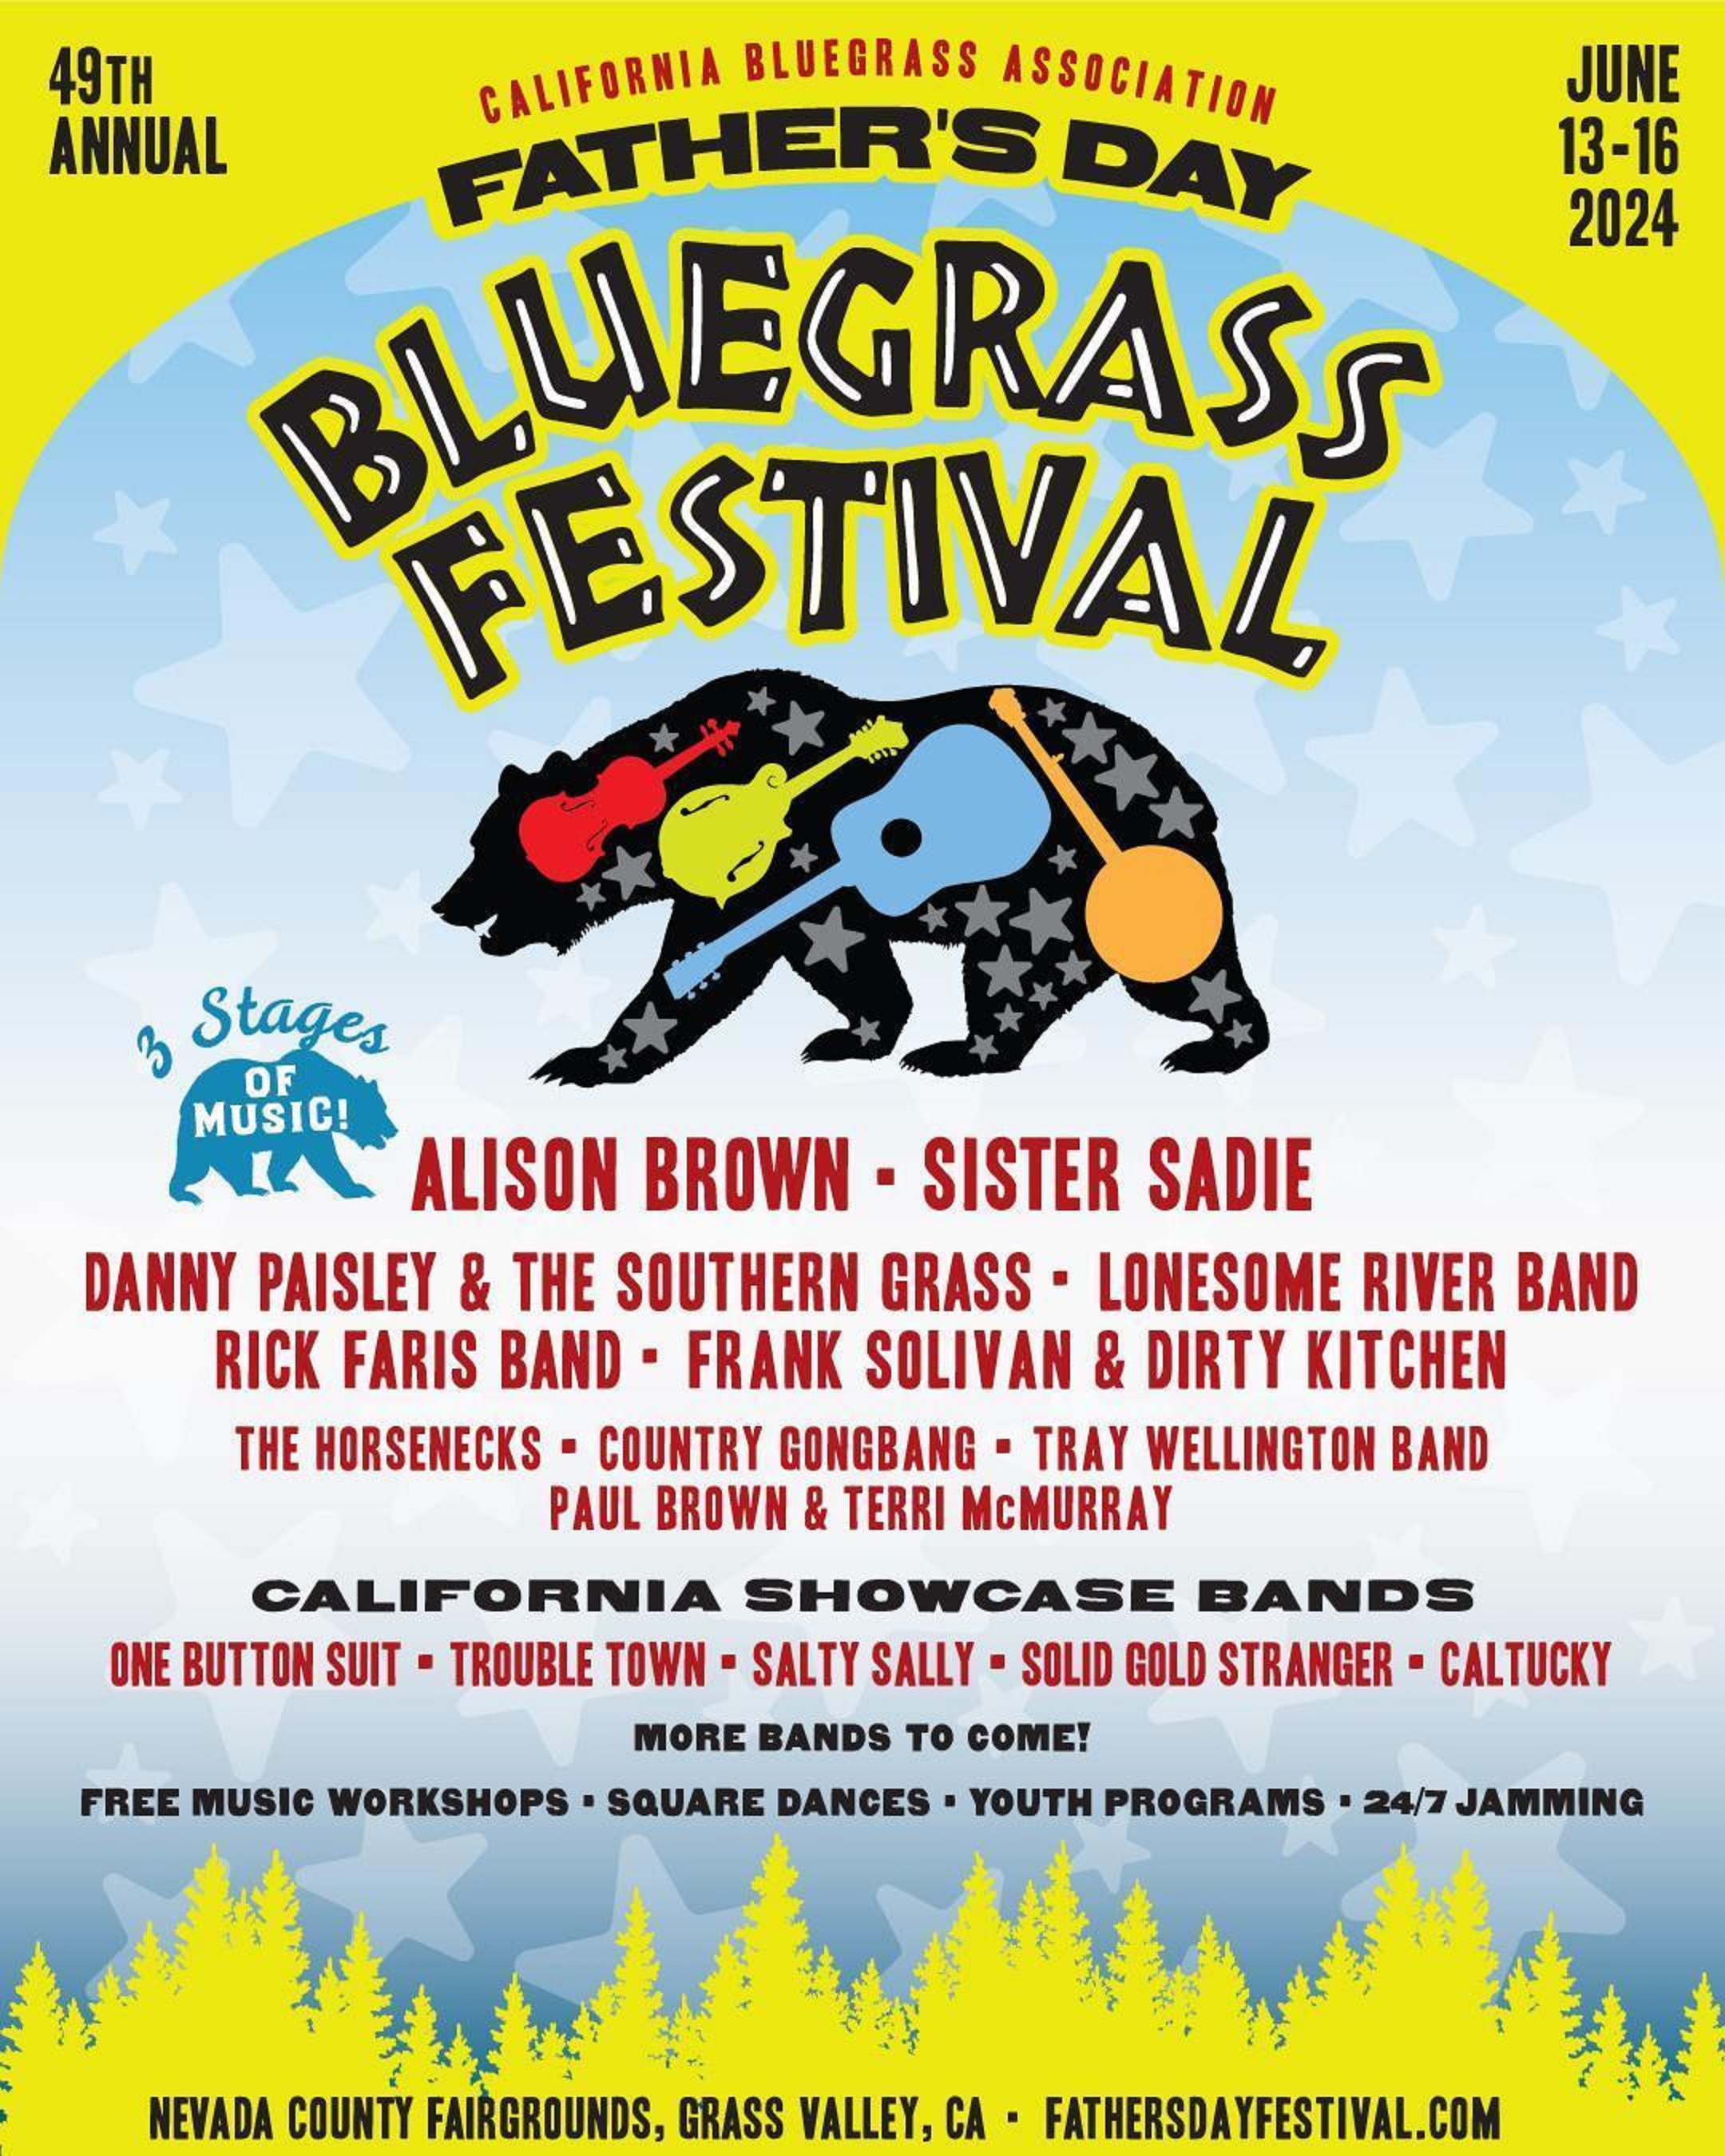 49th Annual Father's Day Bluegrass Festival in Grass Valley, California Announces Lineup